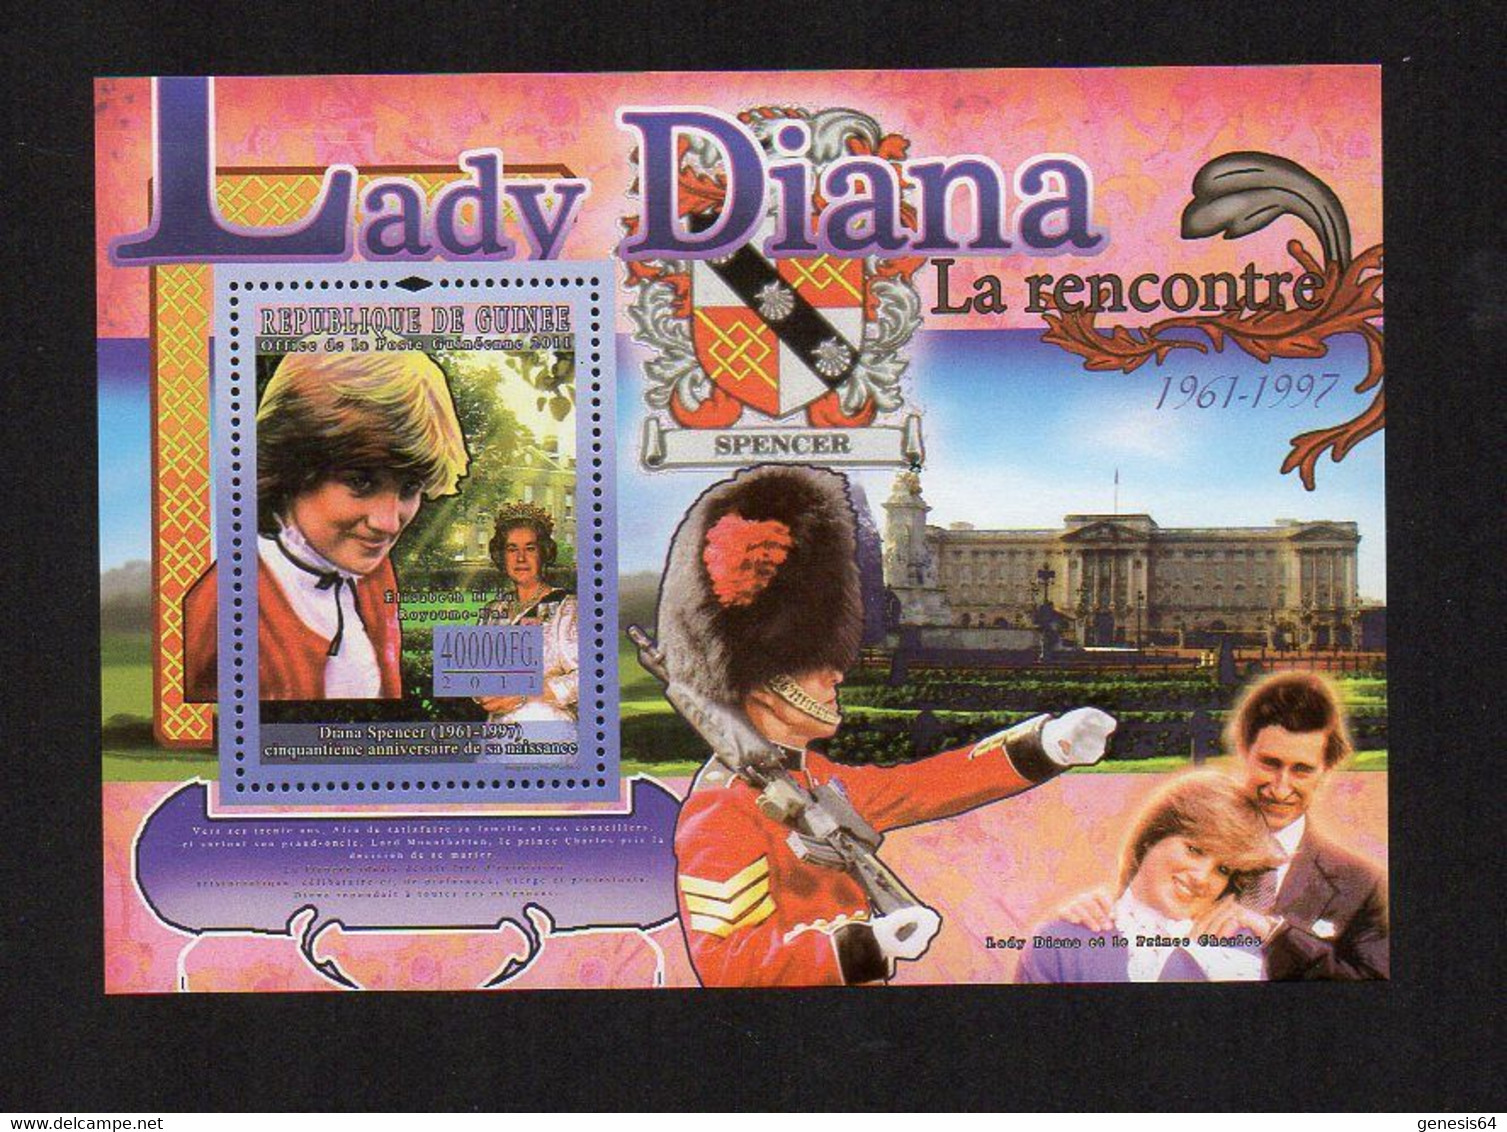 50th Anniversary Of Lady Diana, (1961-1997) - Royalty Stamp - MNH (Guinea 2011) (1W1220) - Royalties, Royals